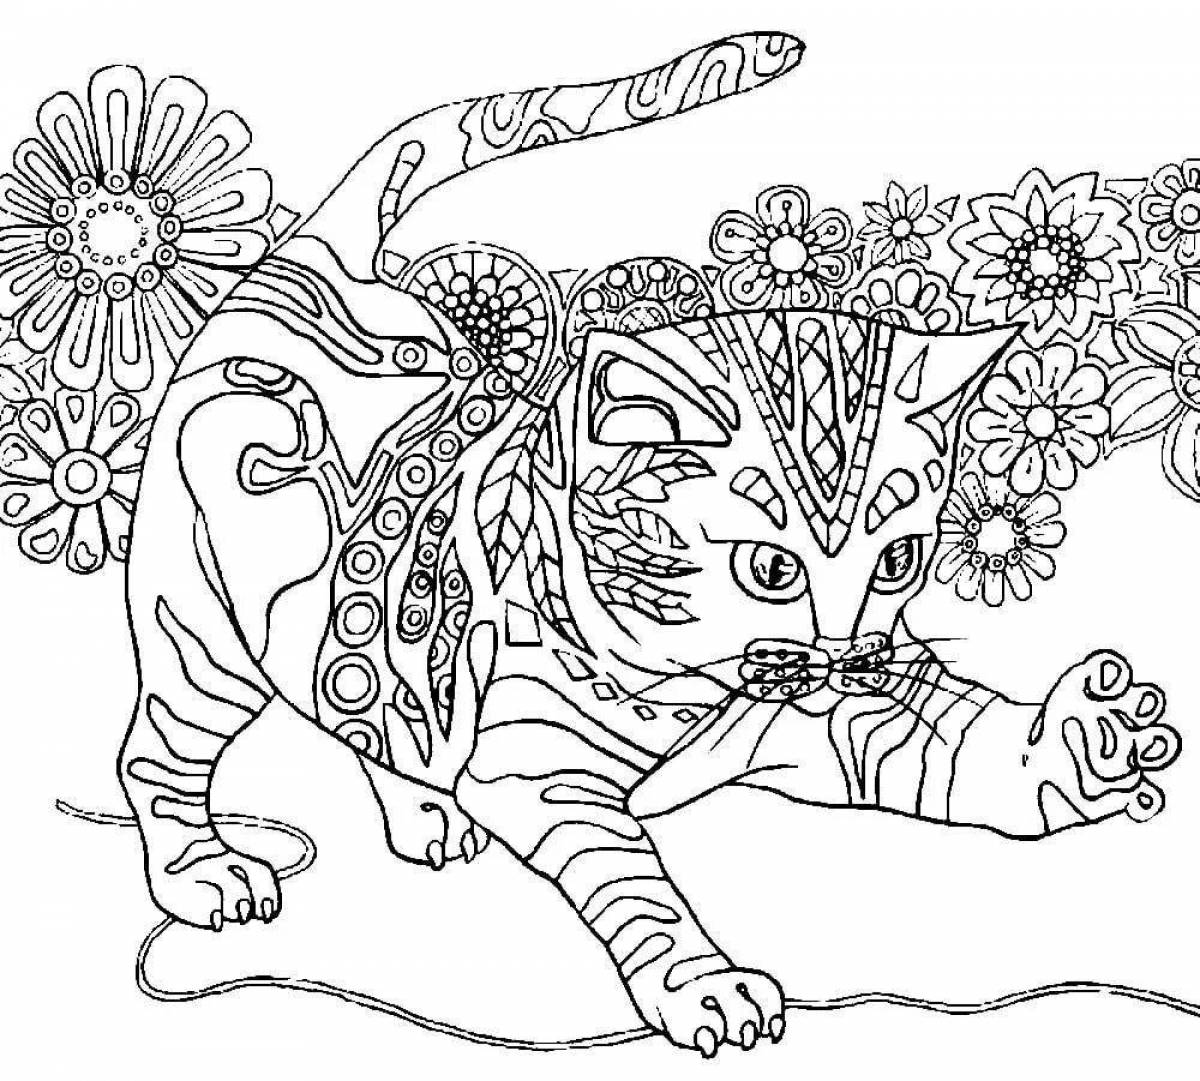 Coloring page bizarre 10 year old animals